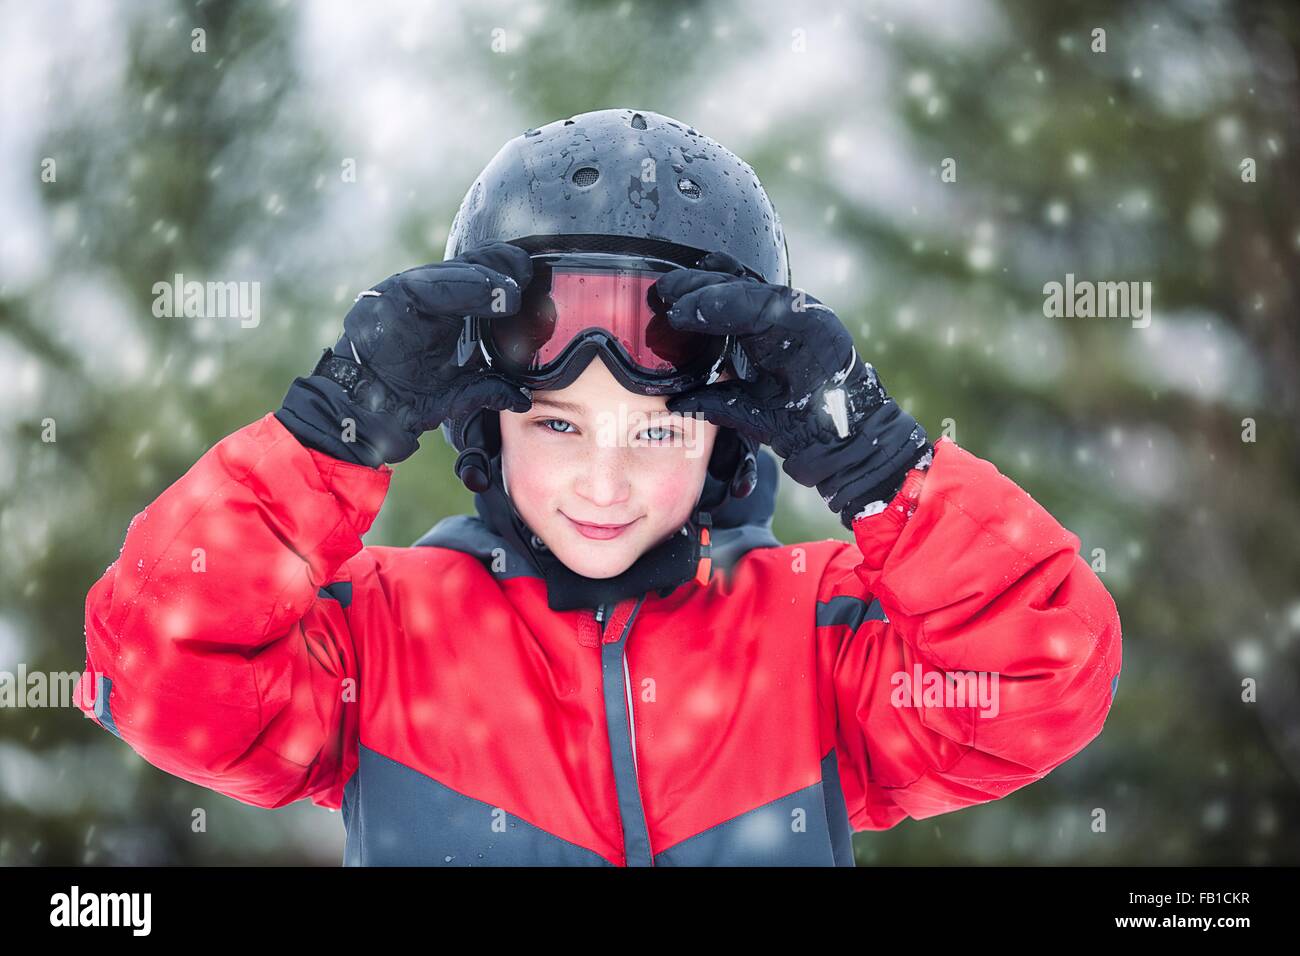 Boy wearing helmet and skiing goggles looking at camera smiling, snowing Stock Photo